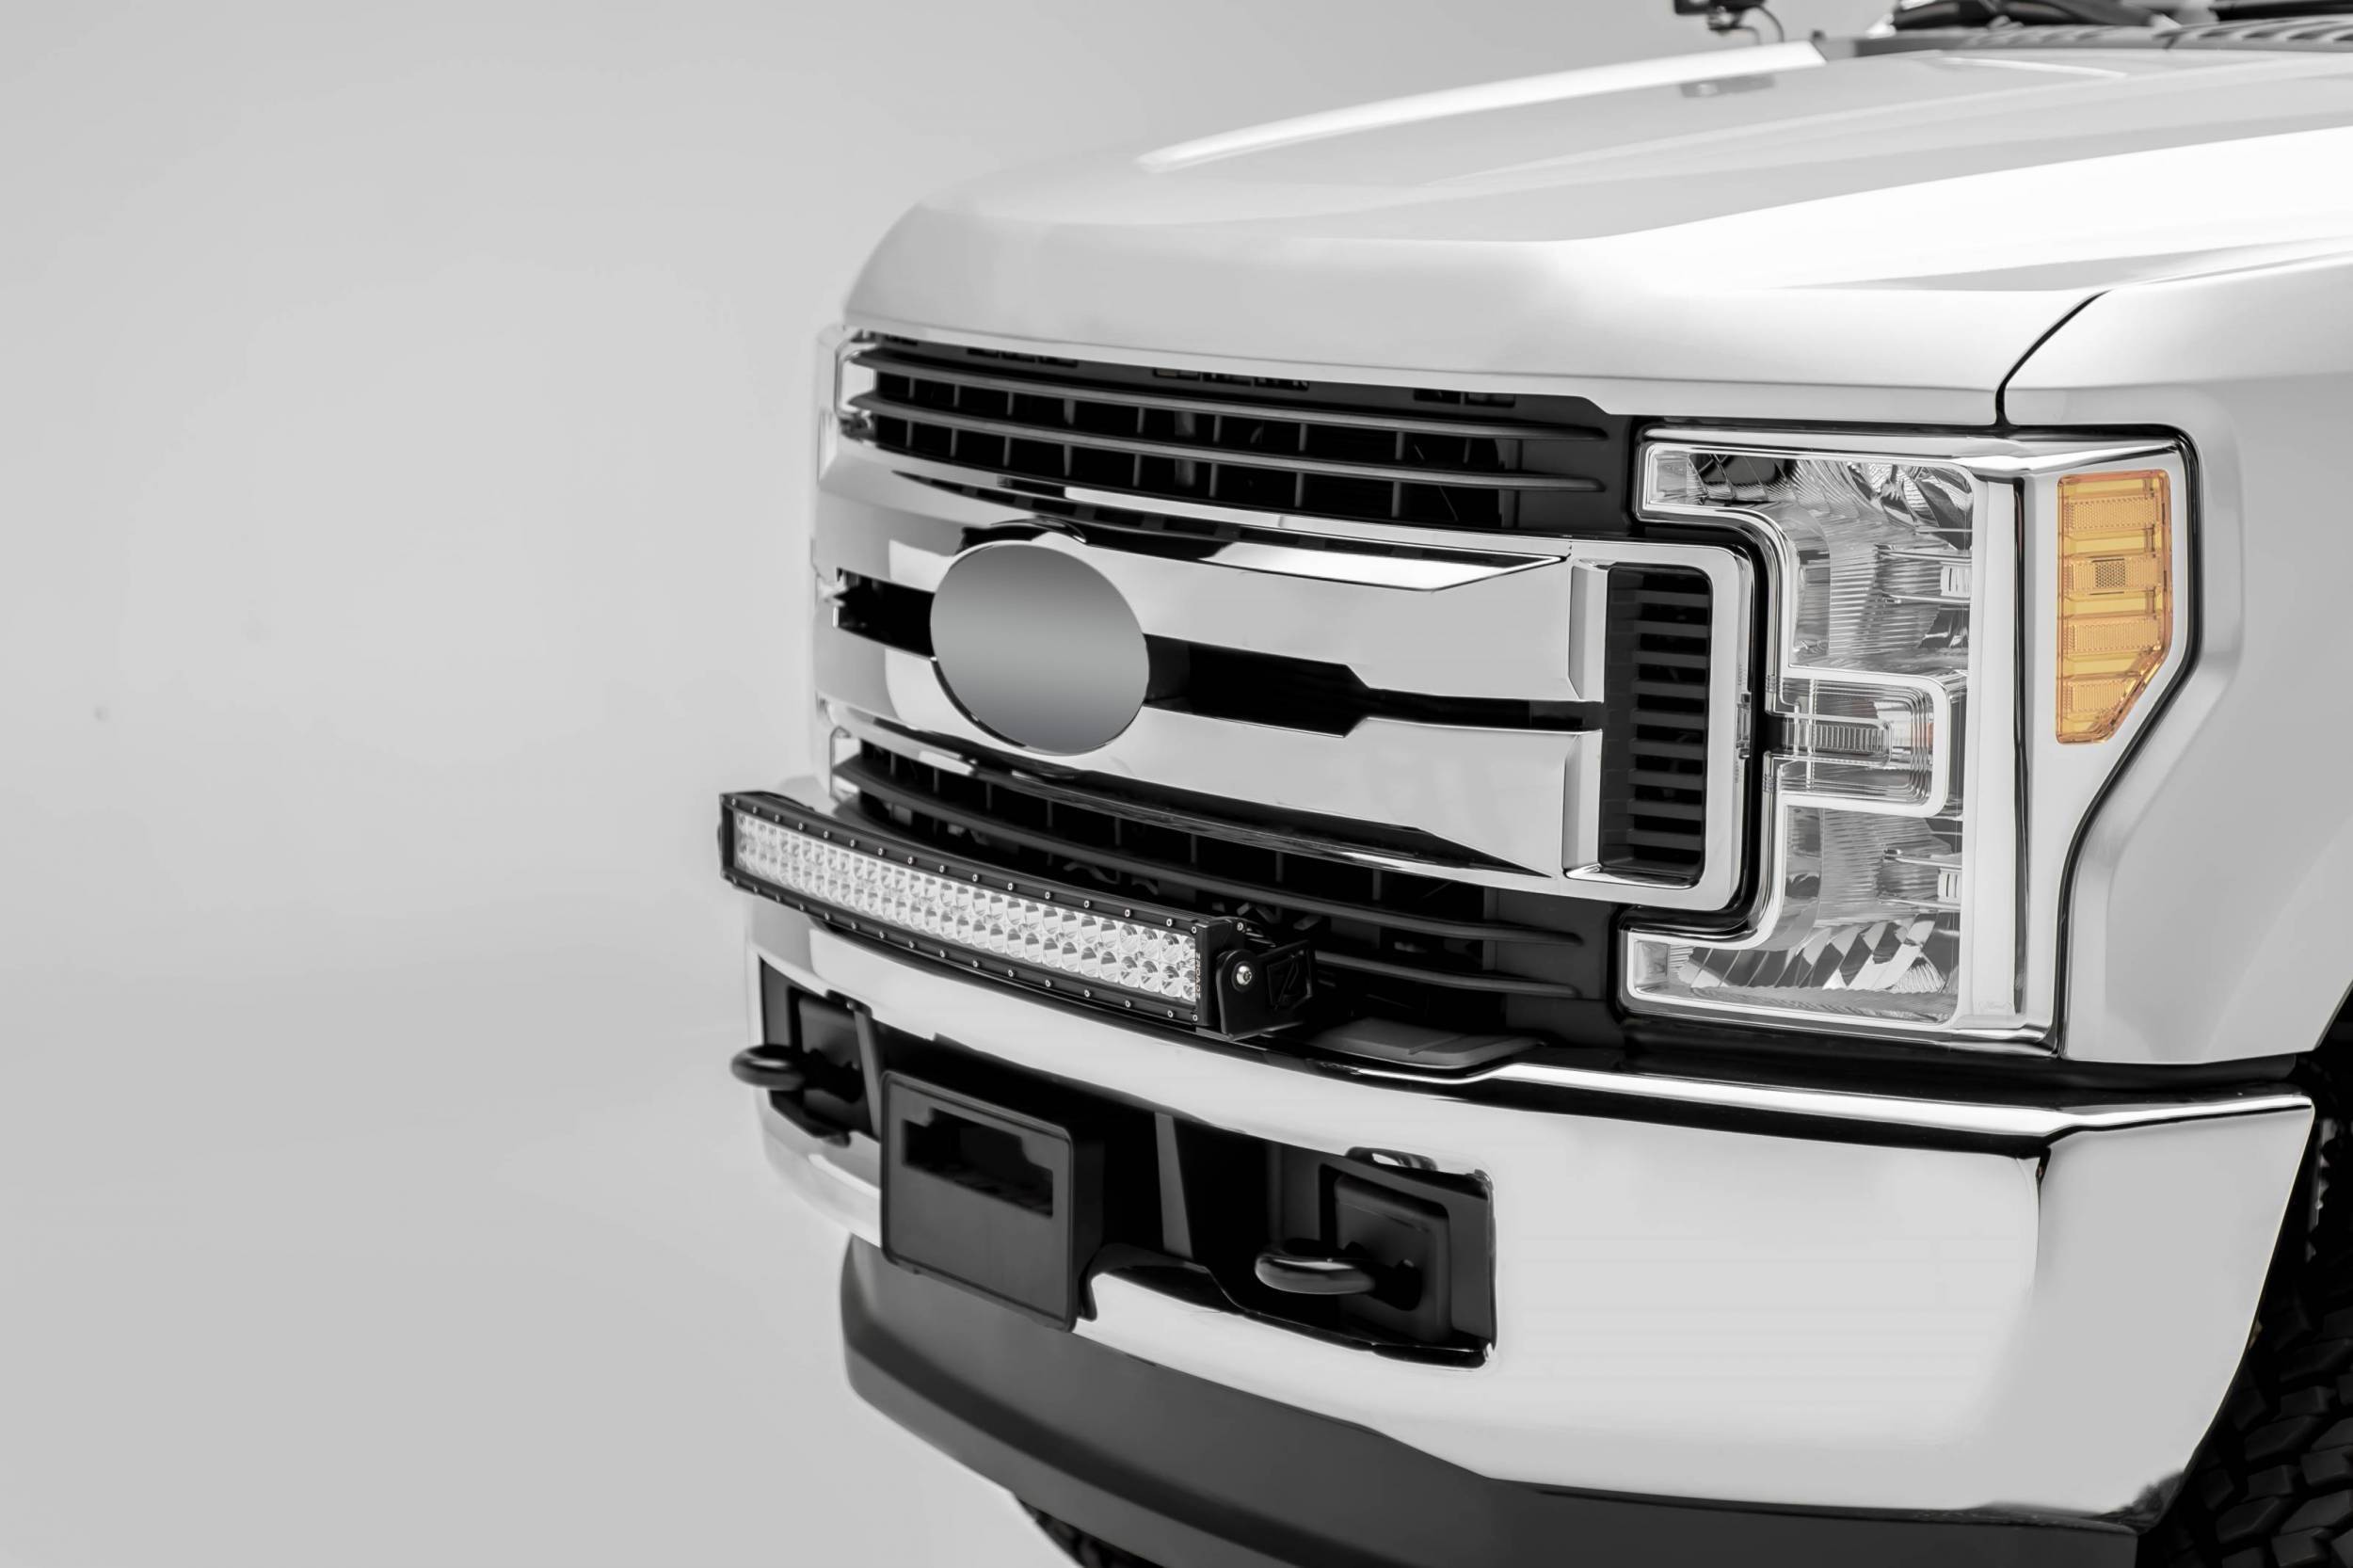 ZROADZ OFF ROAD PRODUCTS - 2017-2019 Ford Super Duty Front Bumper Top LED Bracket to mount (1) 30 Inch Curved LED Light Bar - Part # Z325472